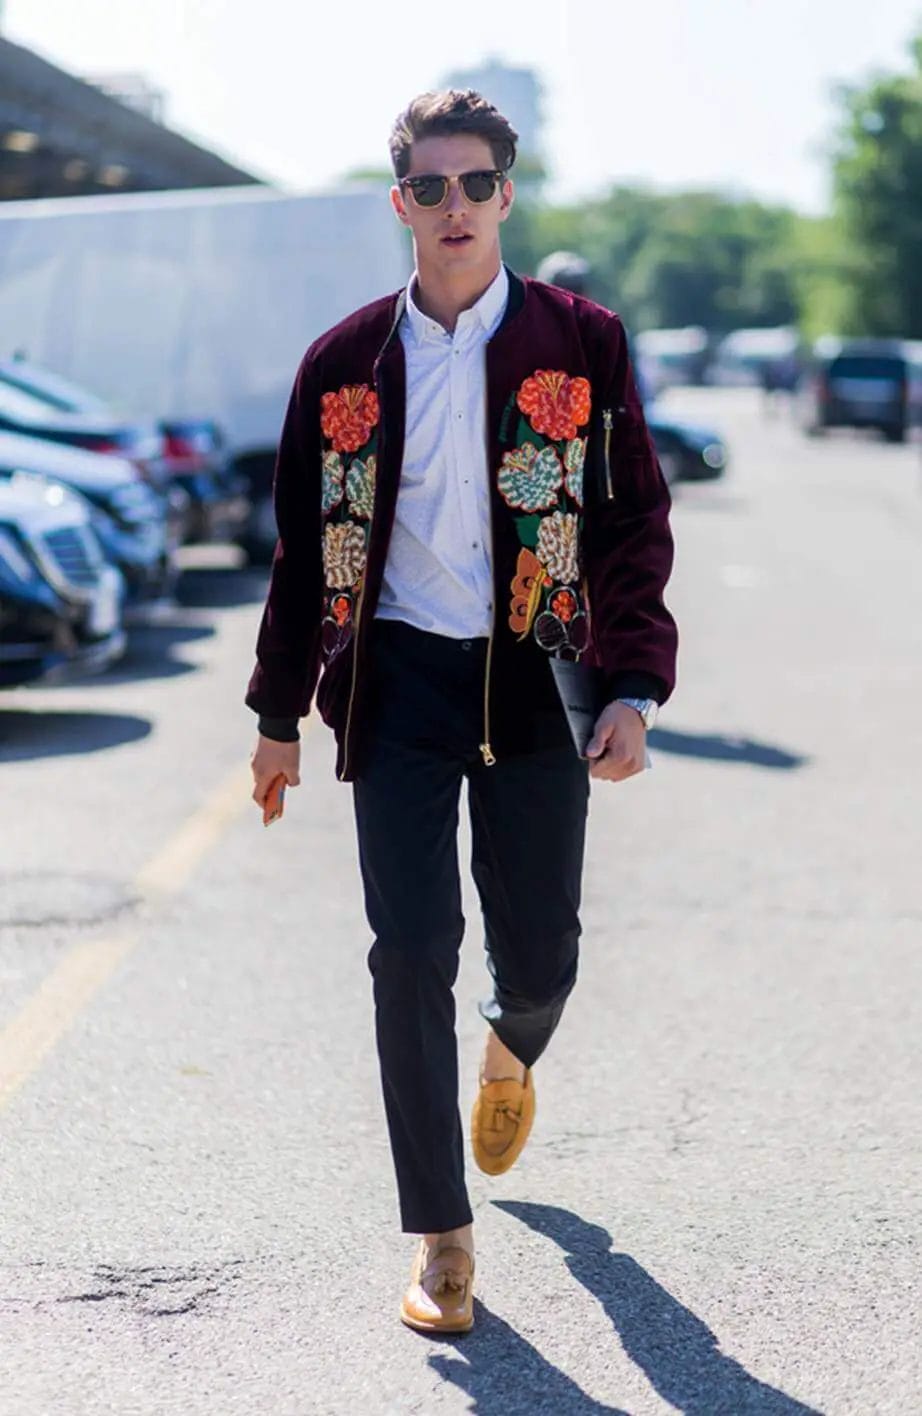 These different men’s fashion styles are perfect to act as a lookbook for those who have a hard time figuring what to wear according to the best style for them.